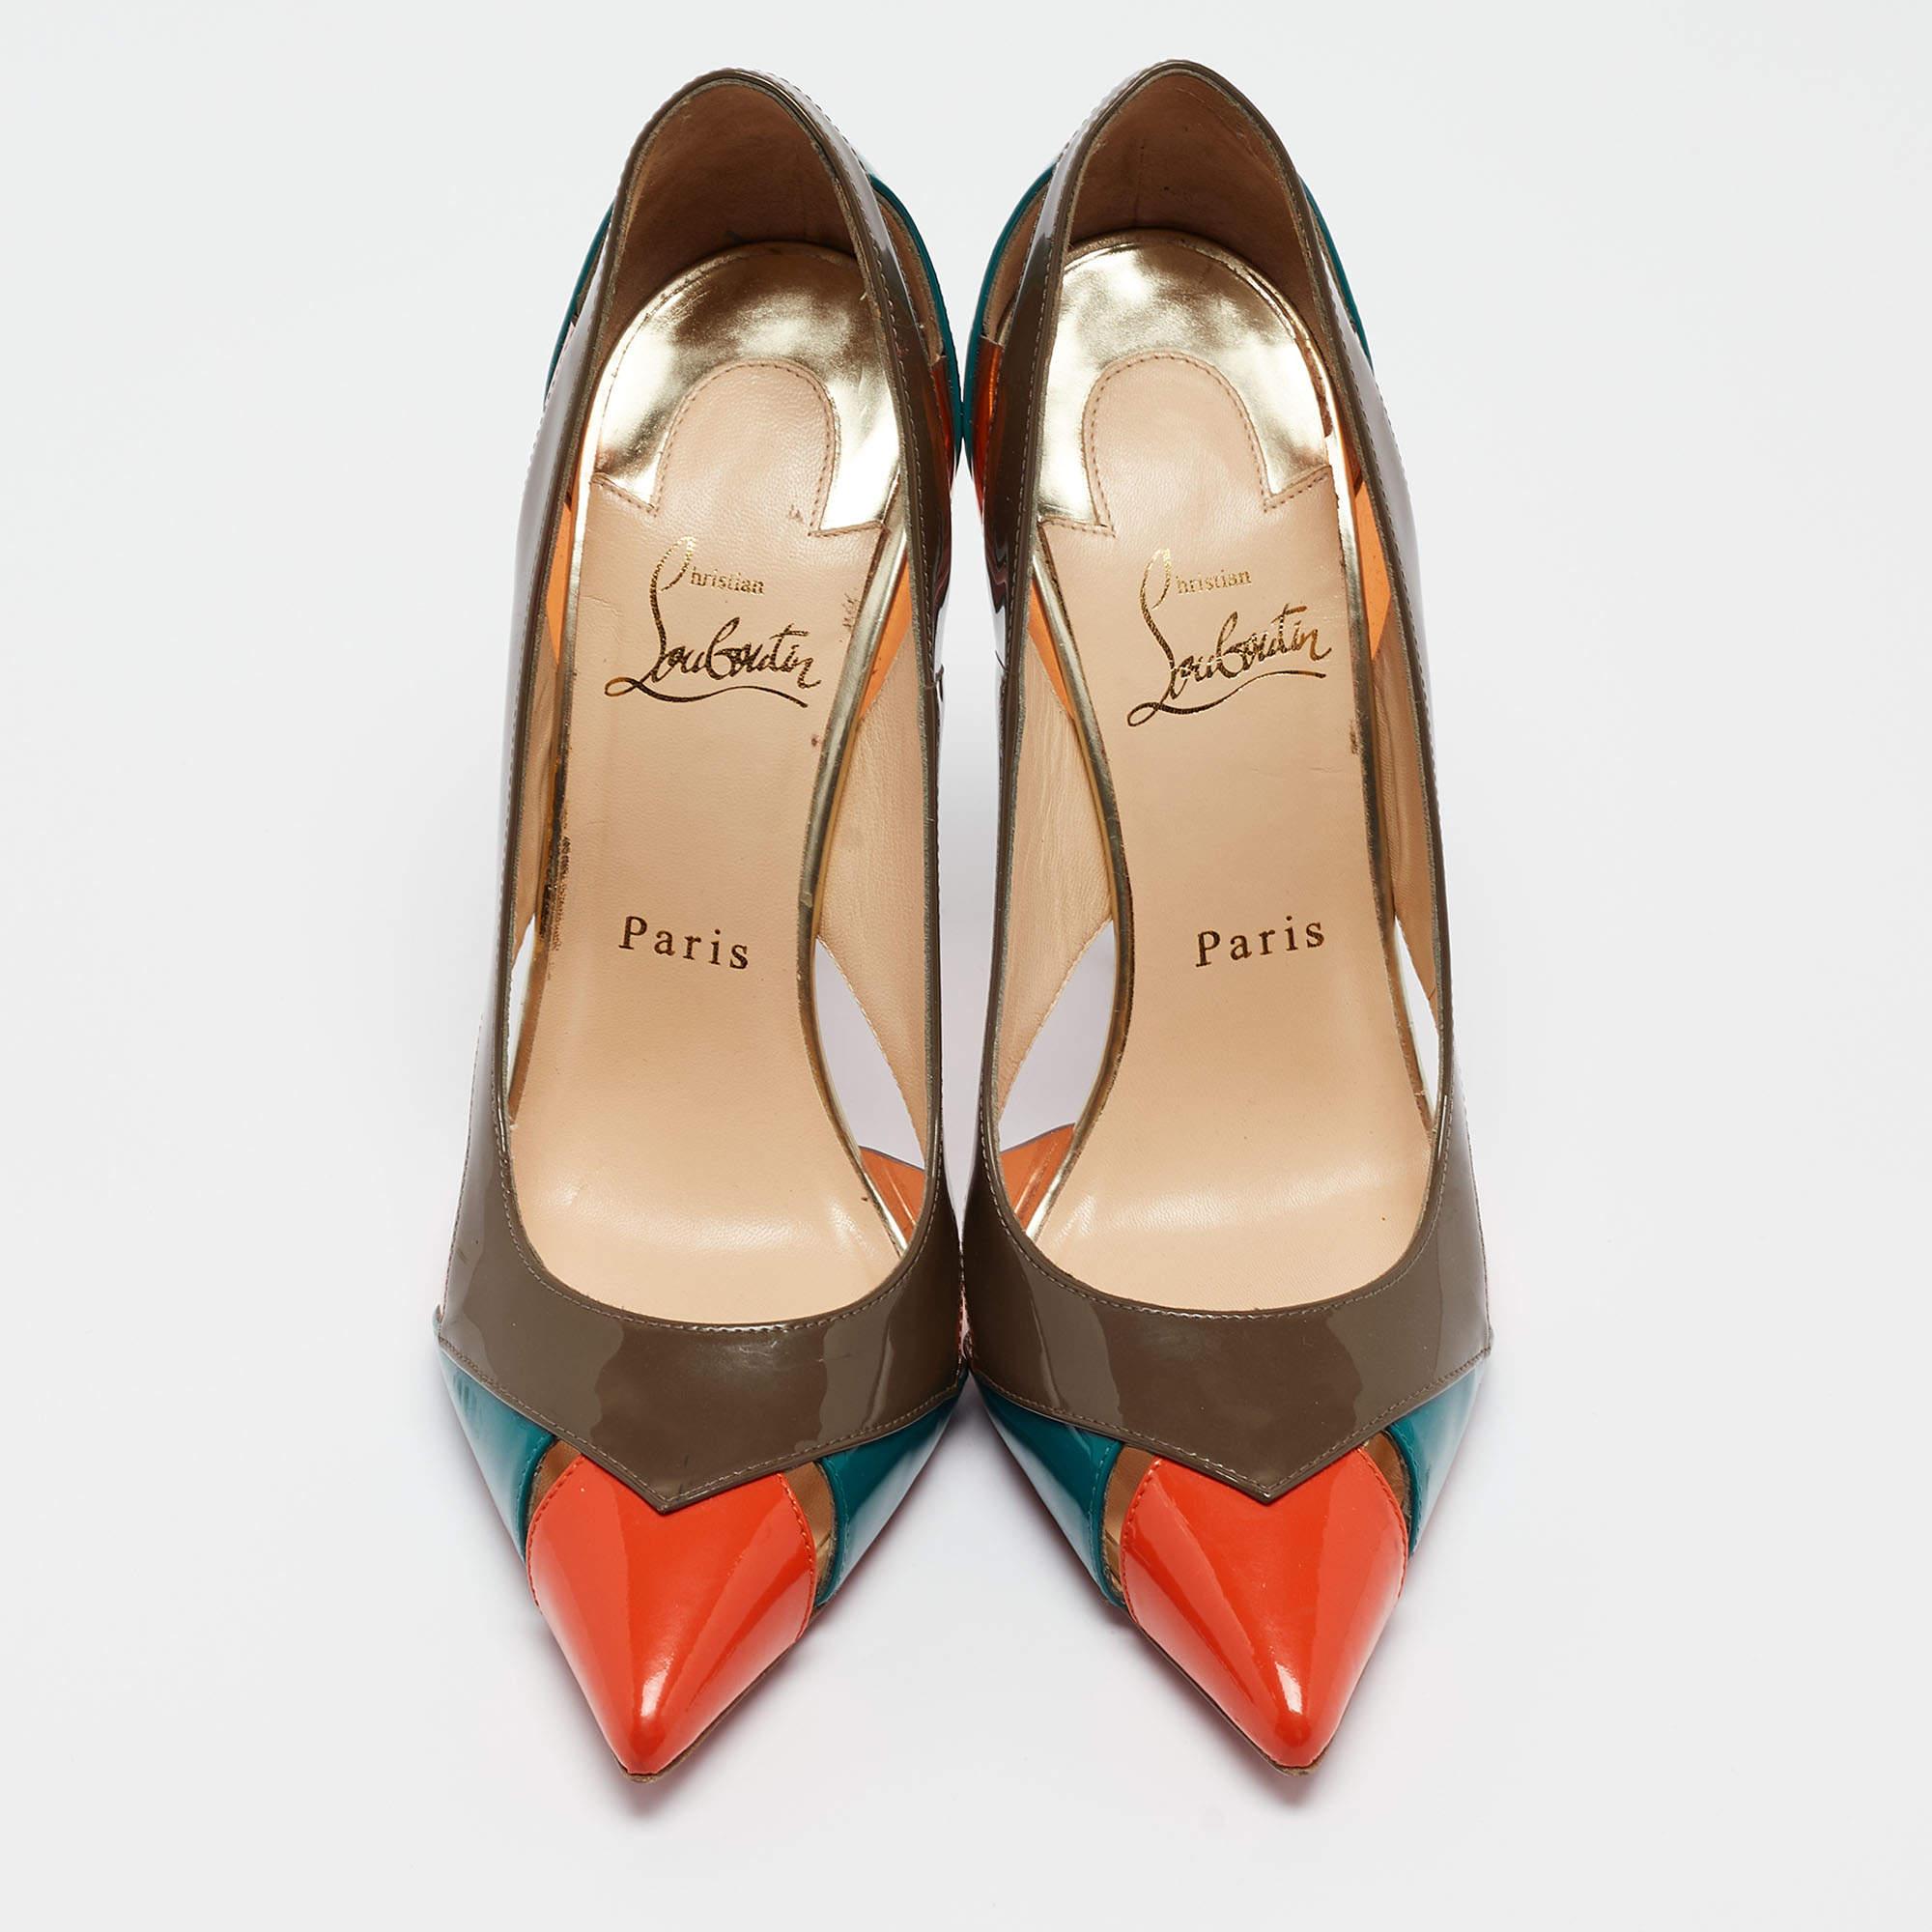 Christian Louboutin is one of the leading names when it comes to a pair of gorgeous pumps like this one. They have been crafted from patent leather & PVC and carry multiple hues that delight. With pointed toes, slip-on style, 12.5cm heels, and